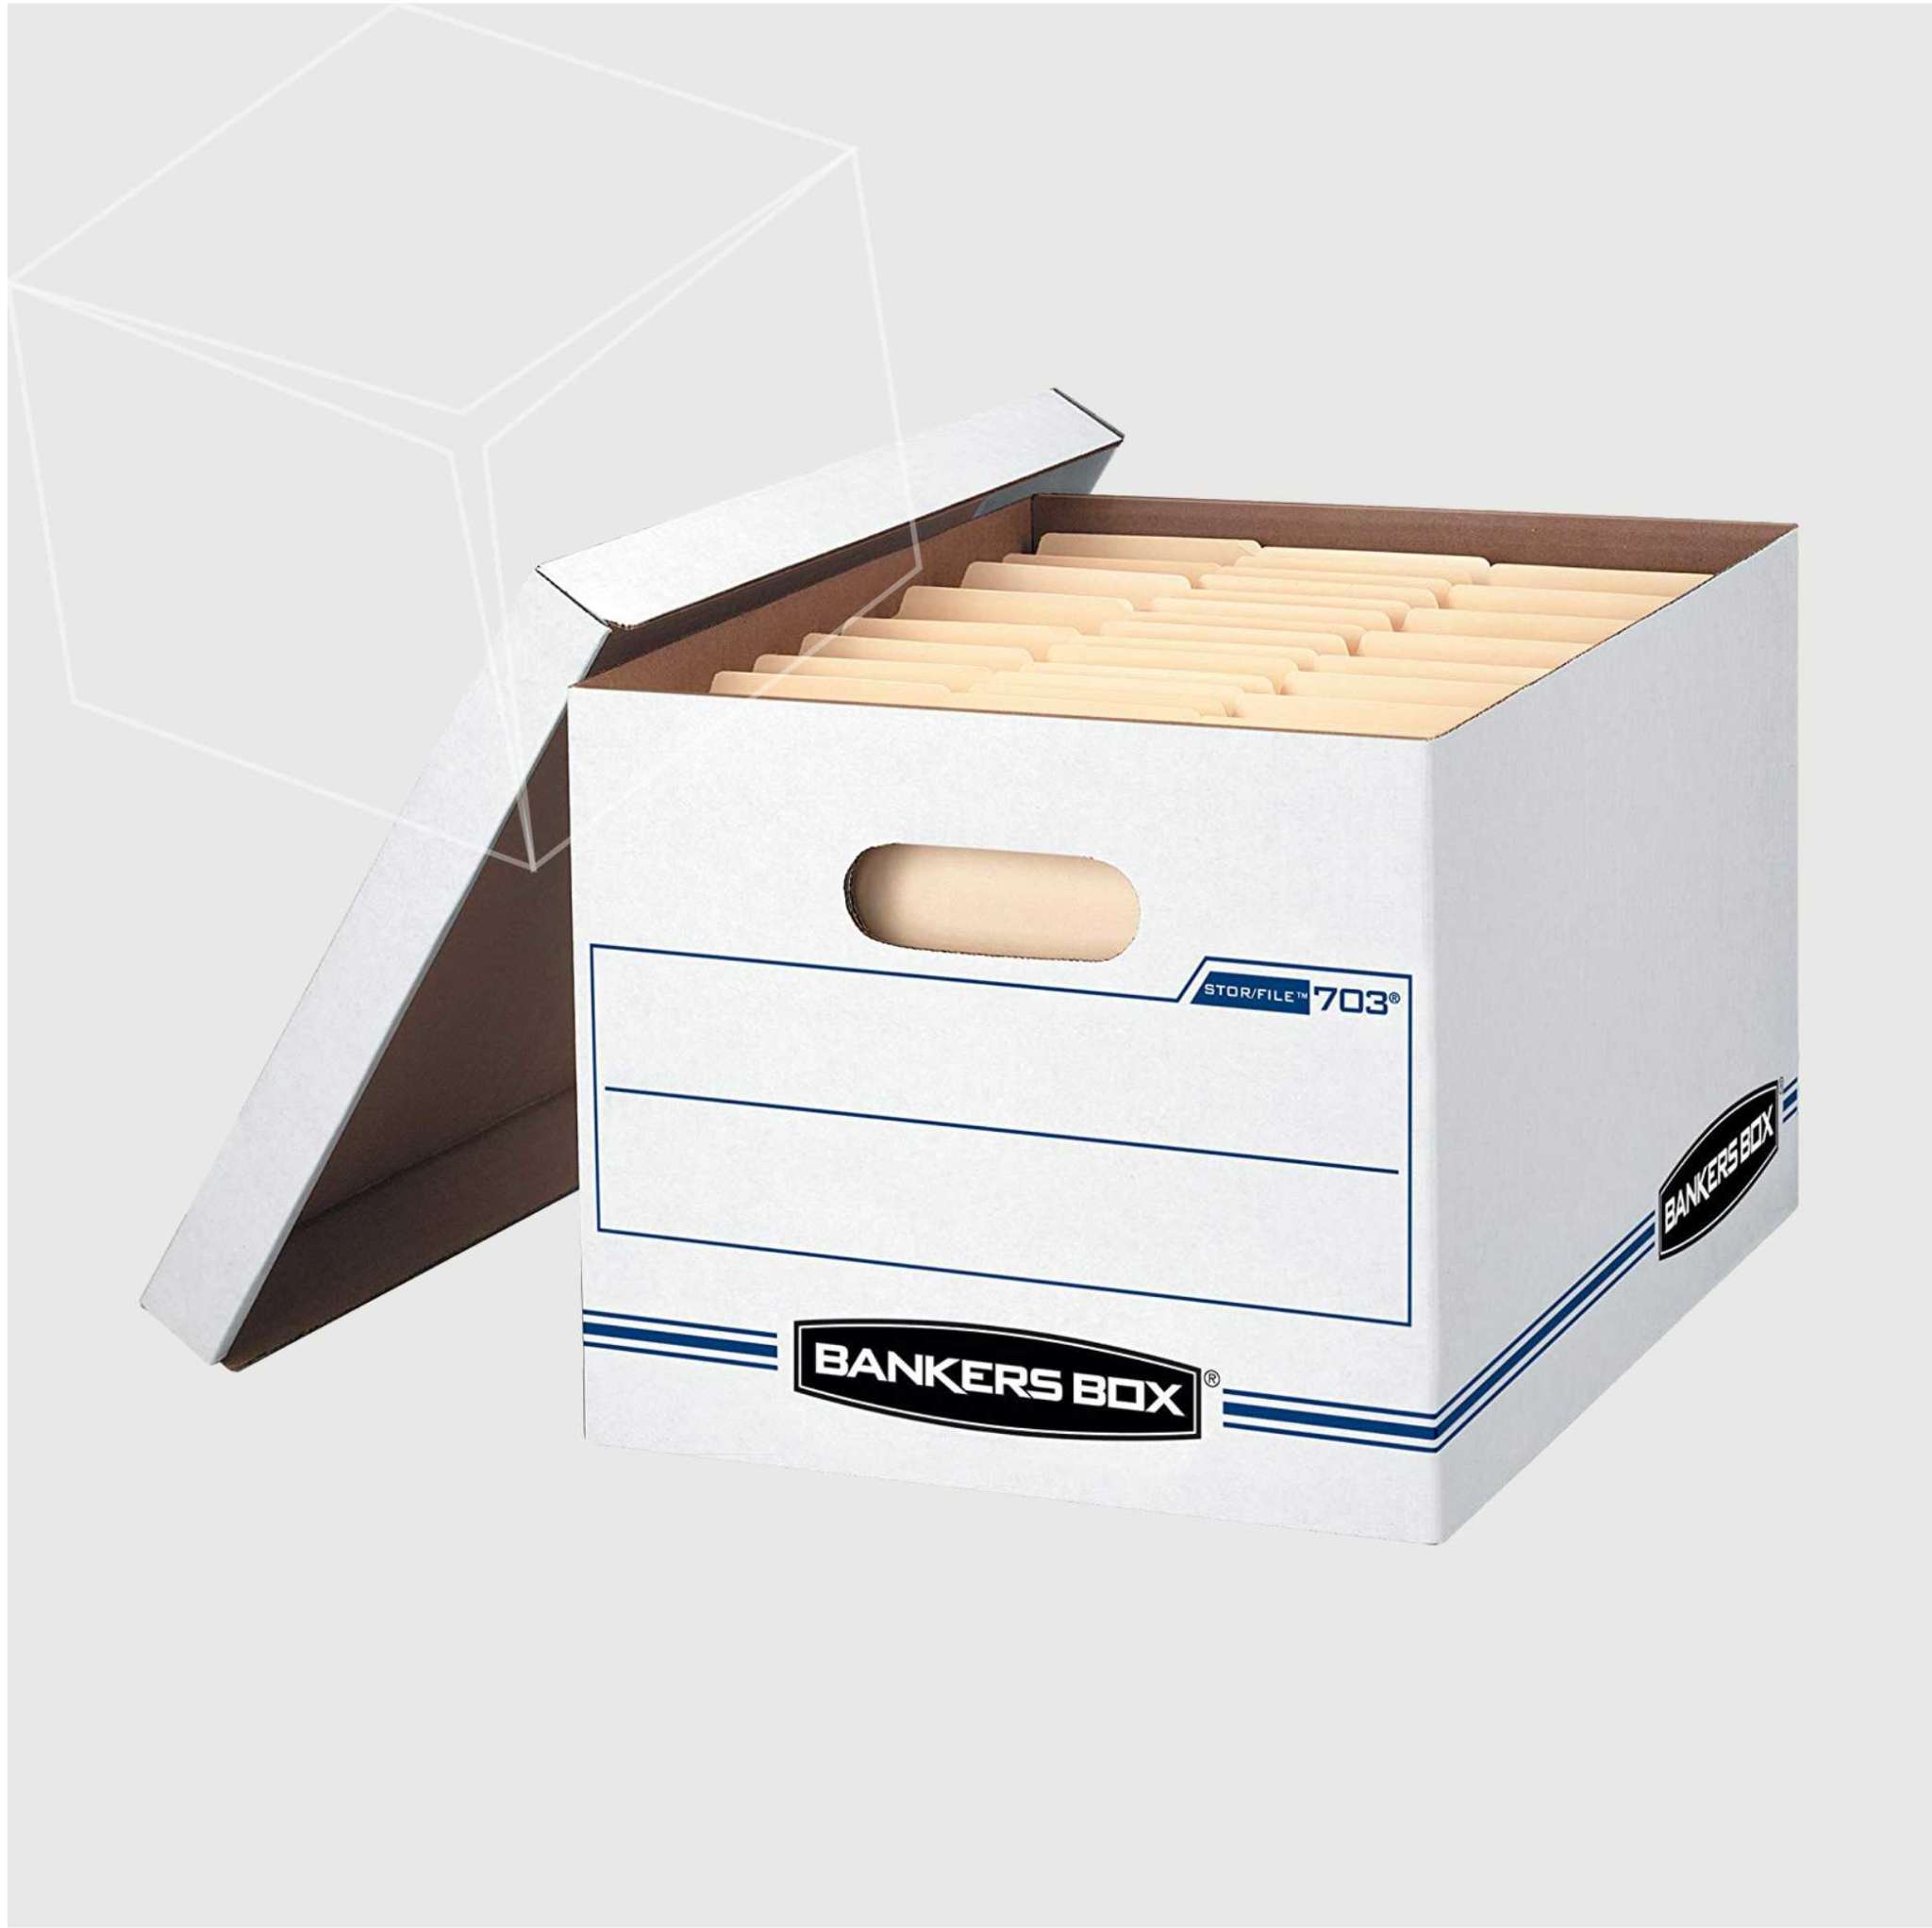 Archive Boxes Printing -, Free Shipping